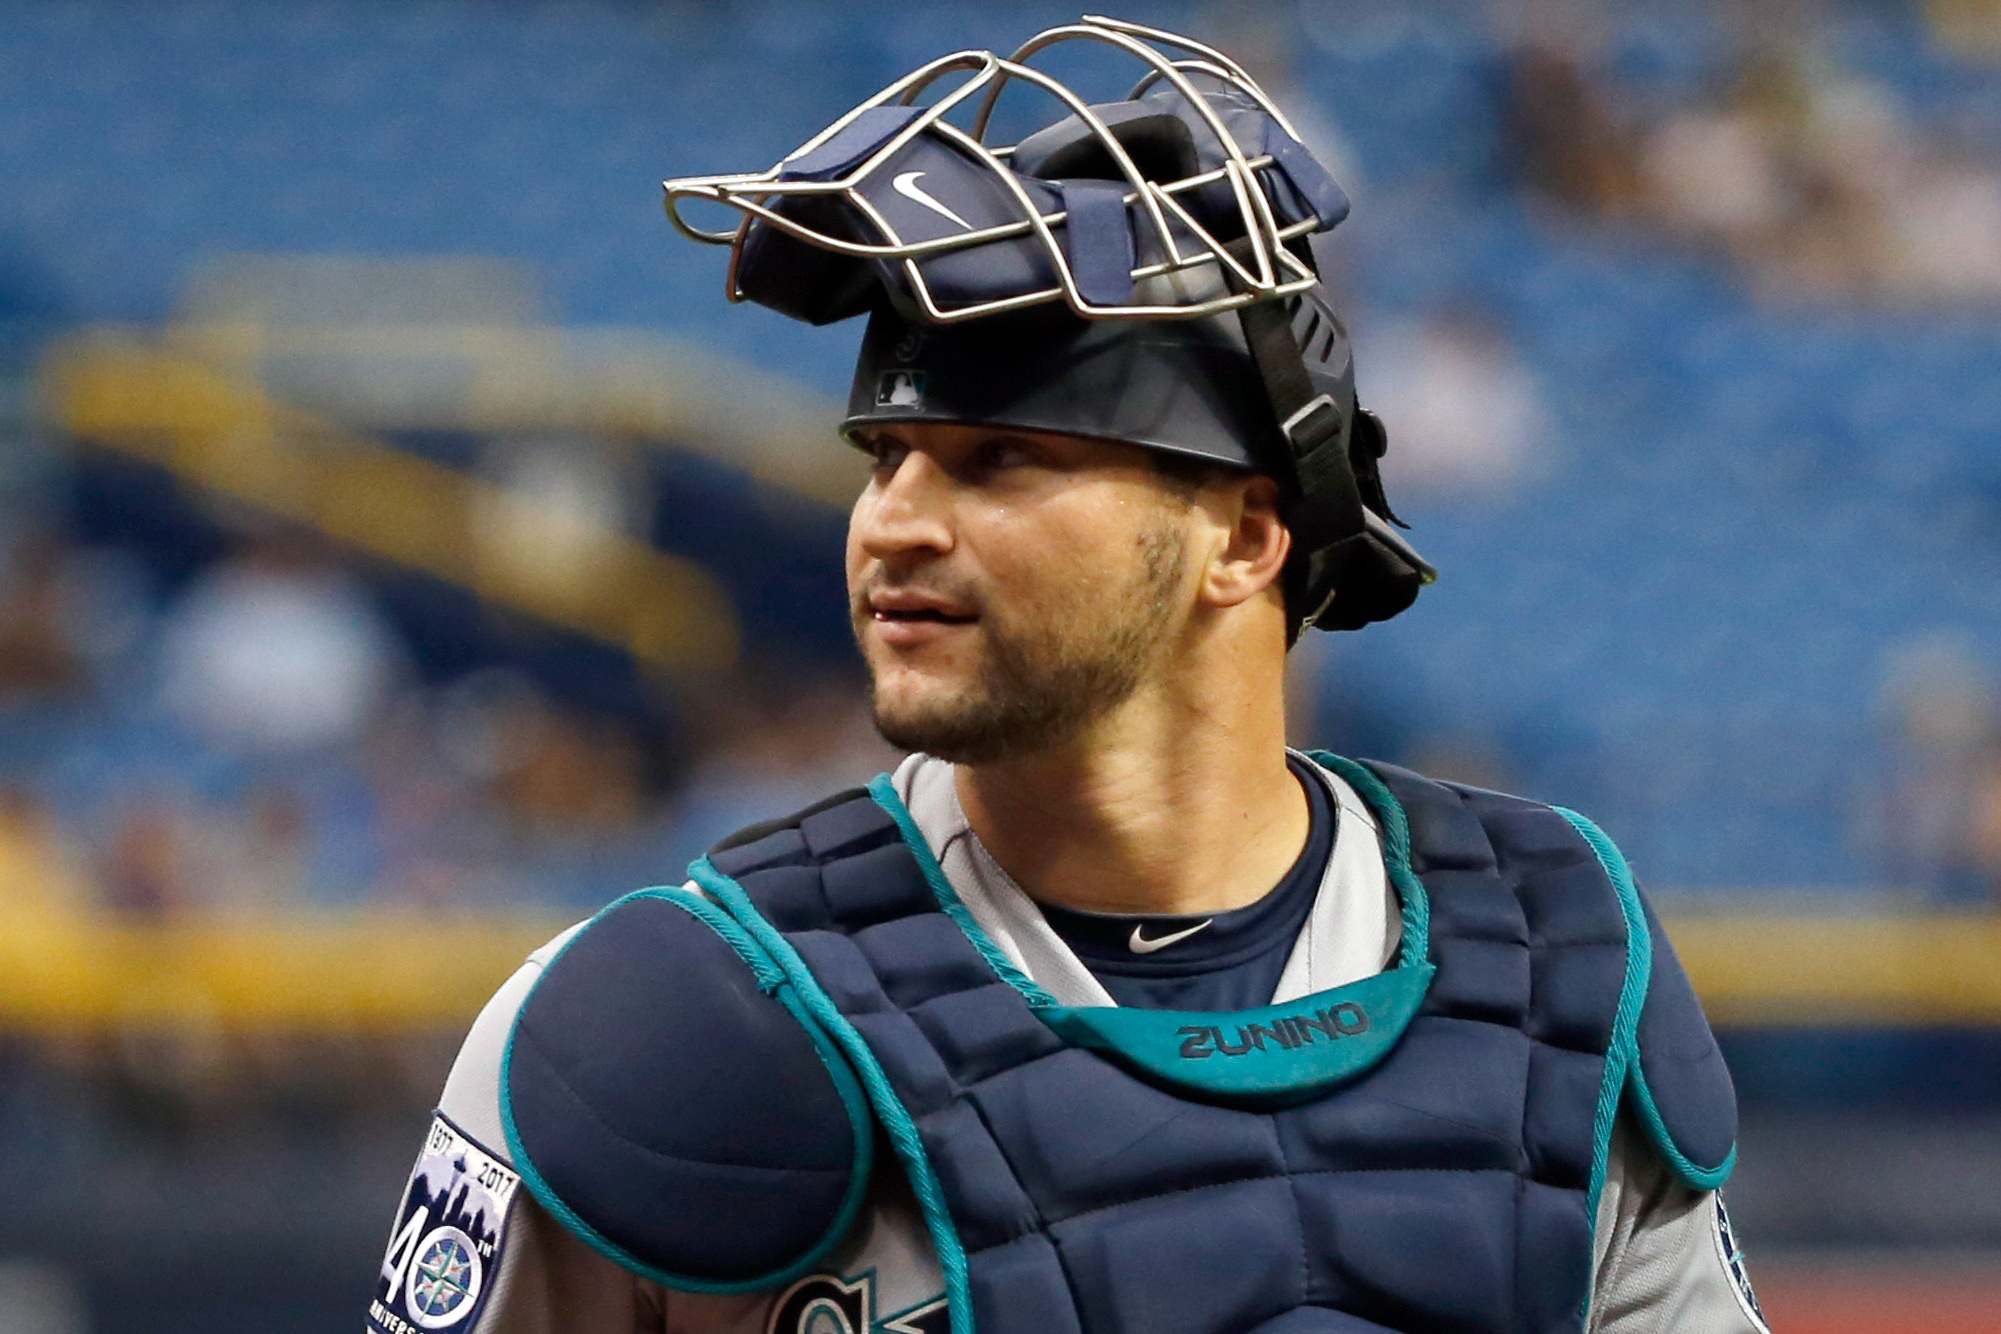 Mike Zunino Lands on the IL